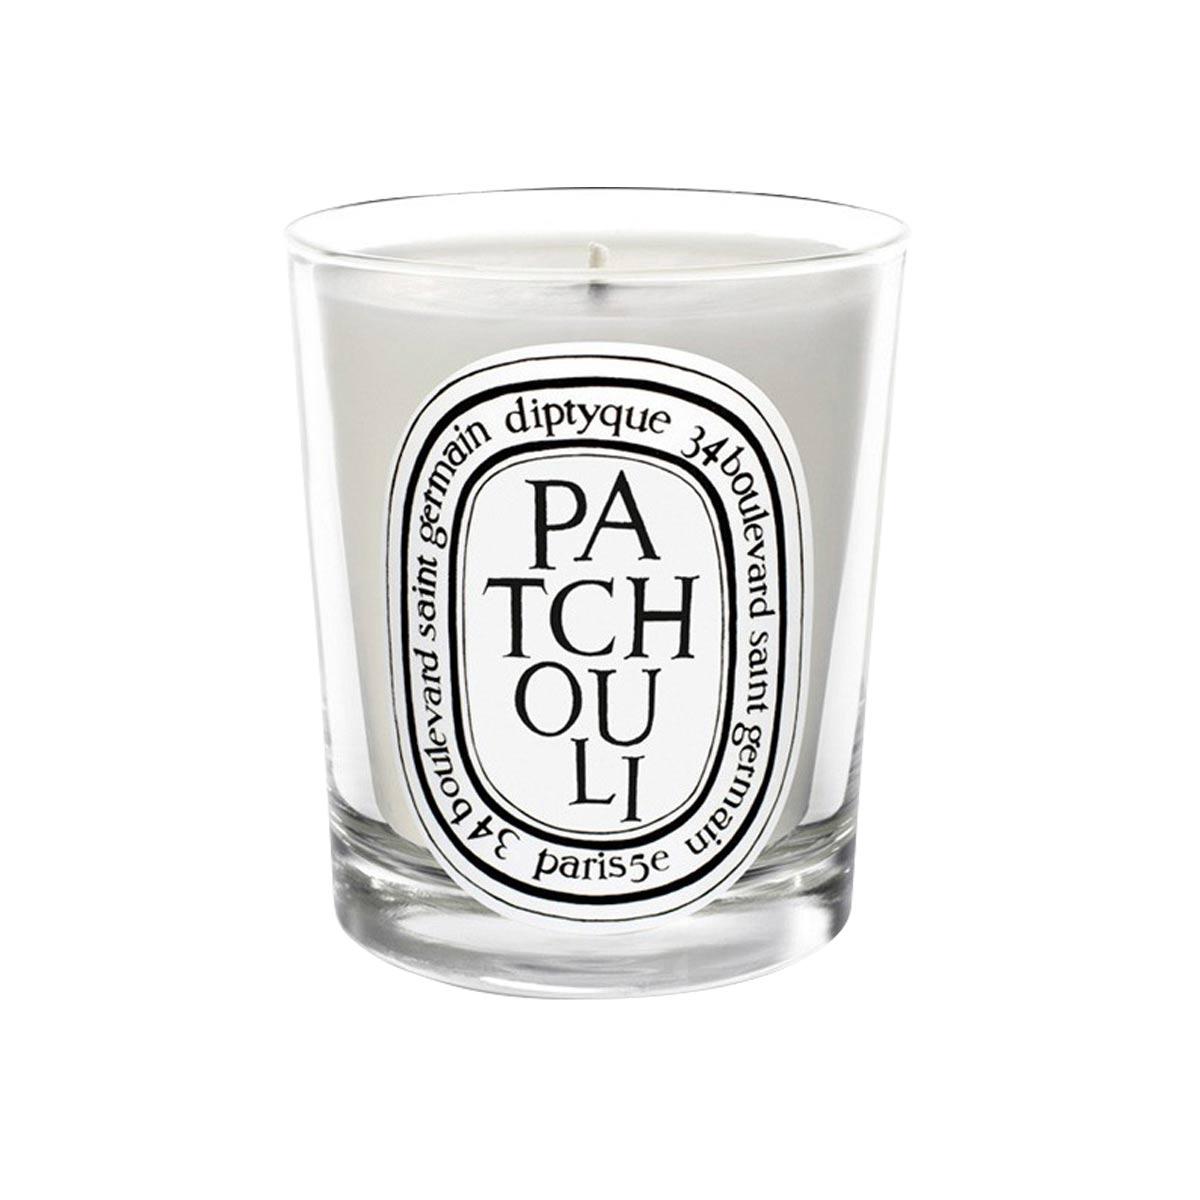 Primary image of Patchouli Candle